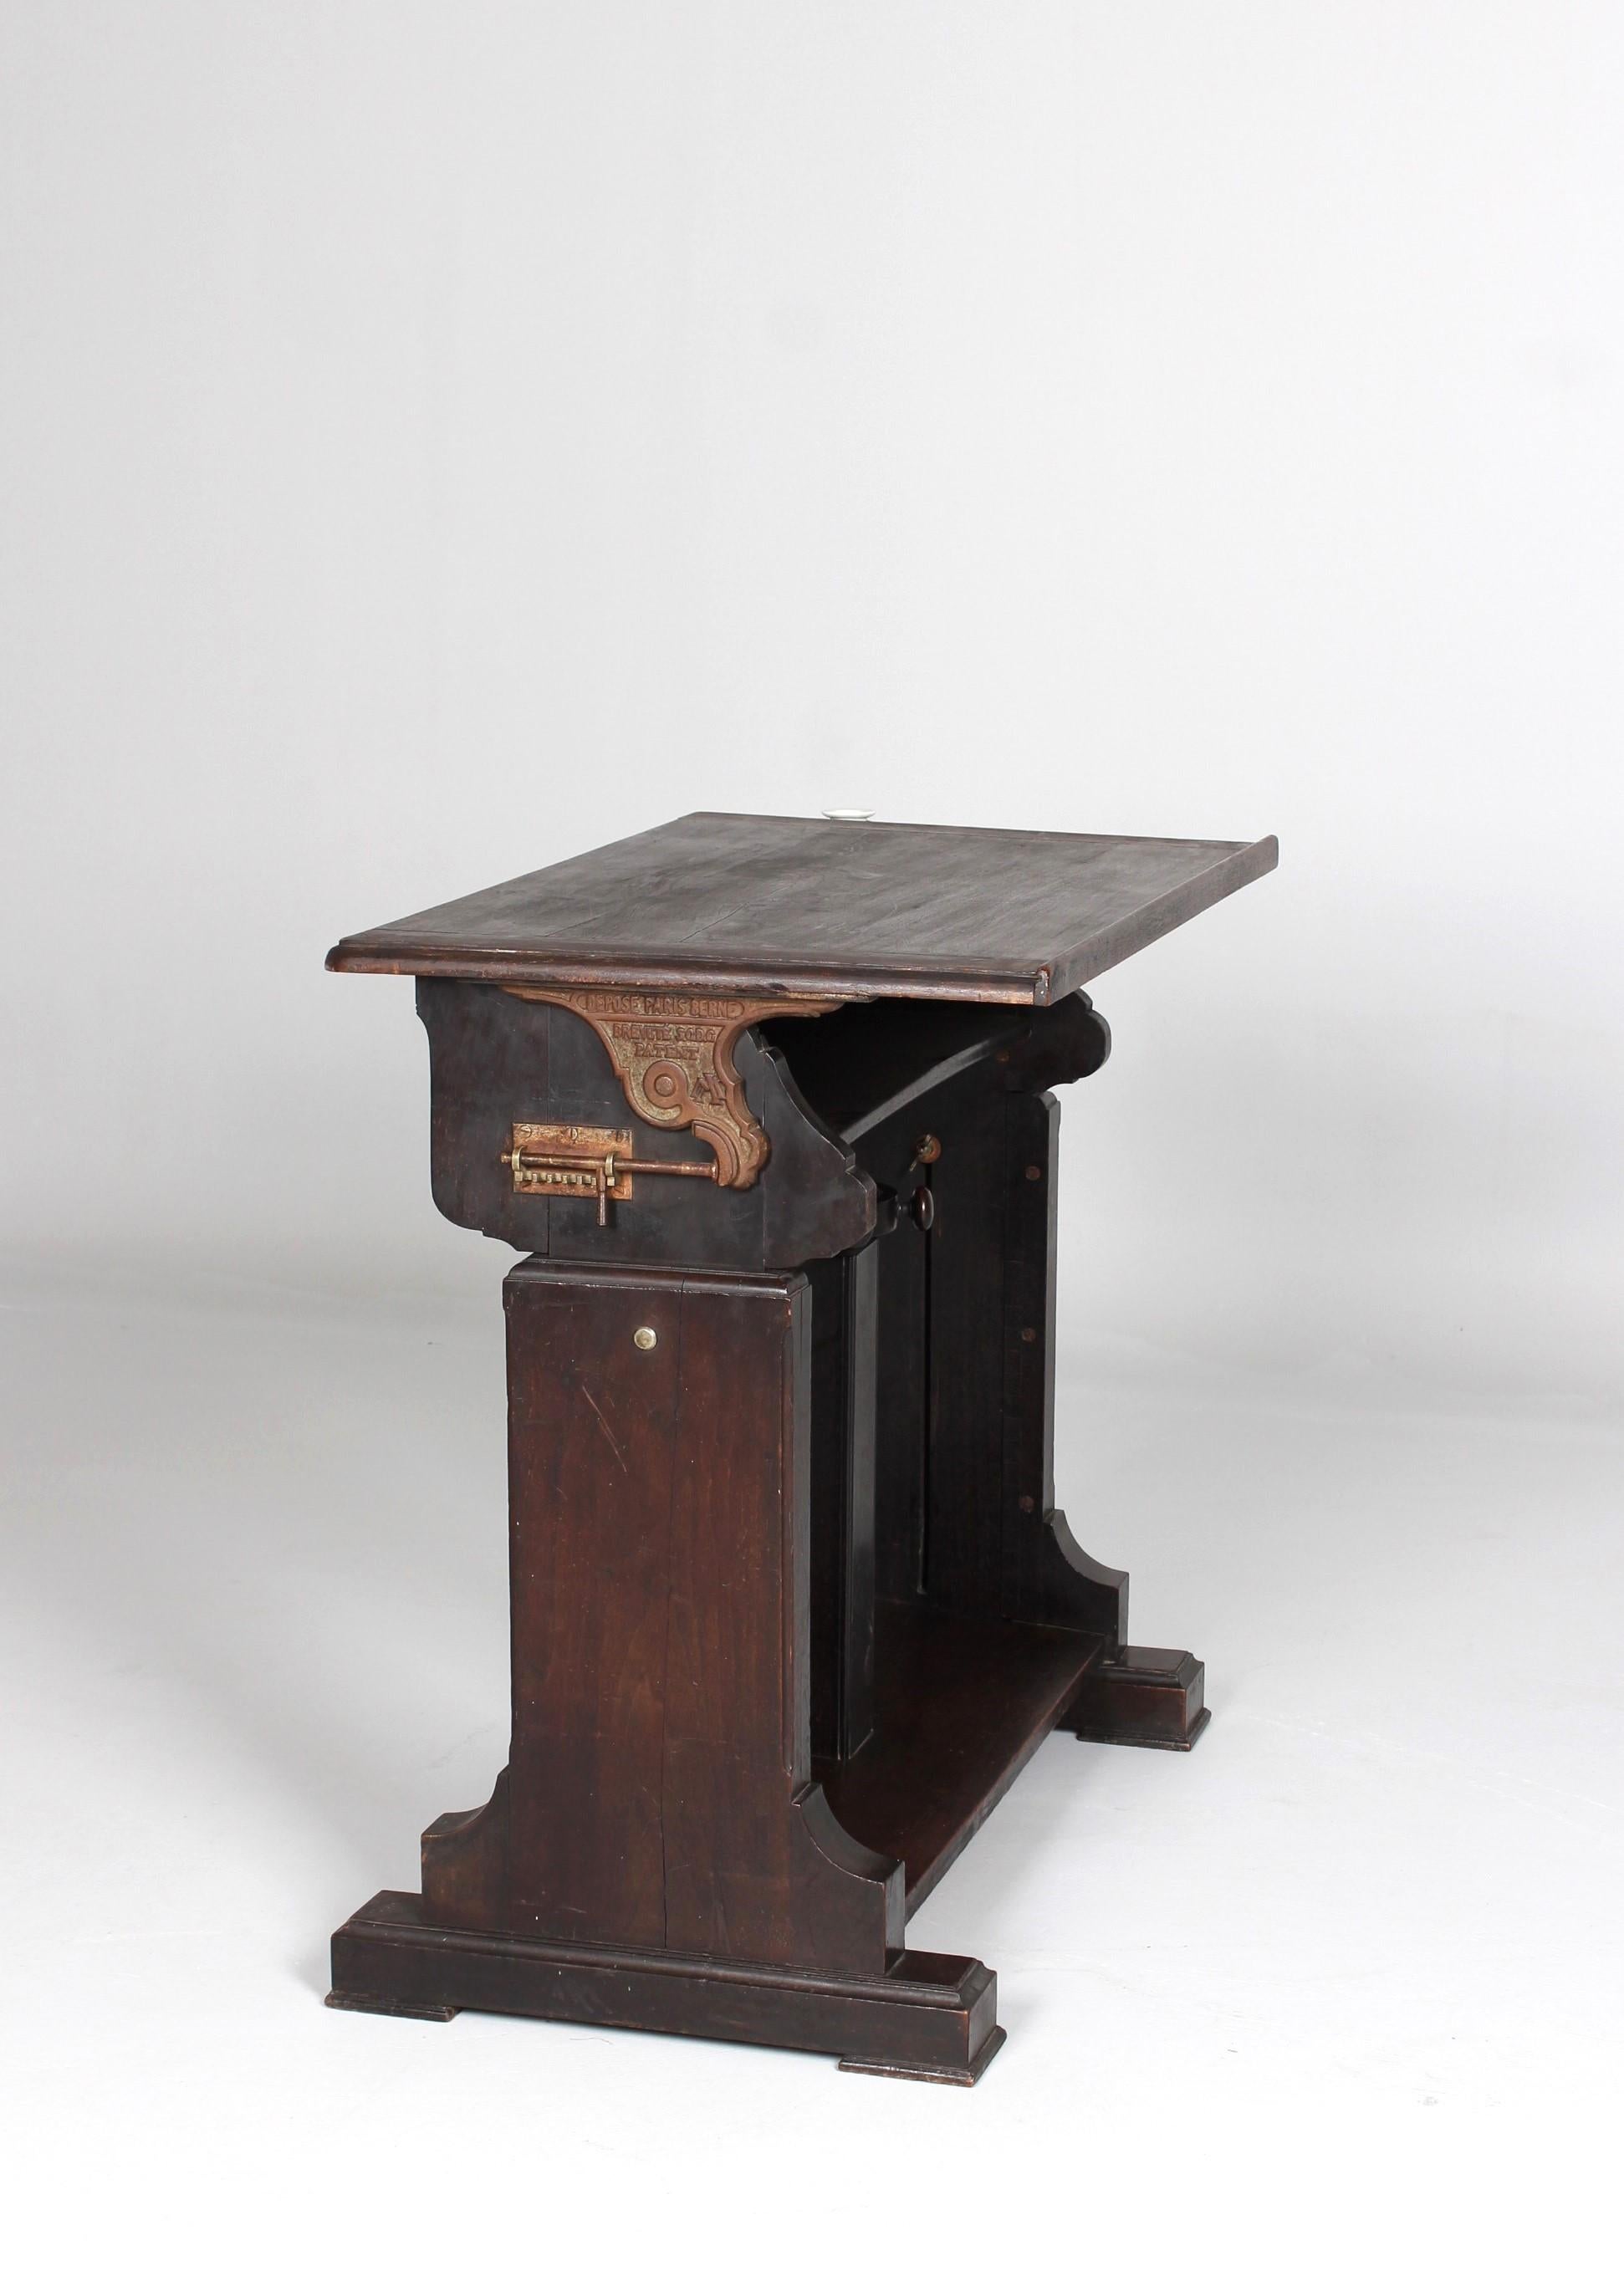 Walnut Early 20th Century Art Nouveau Lectern or Drawing Table, Switzerland, circa 1910